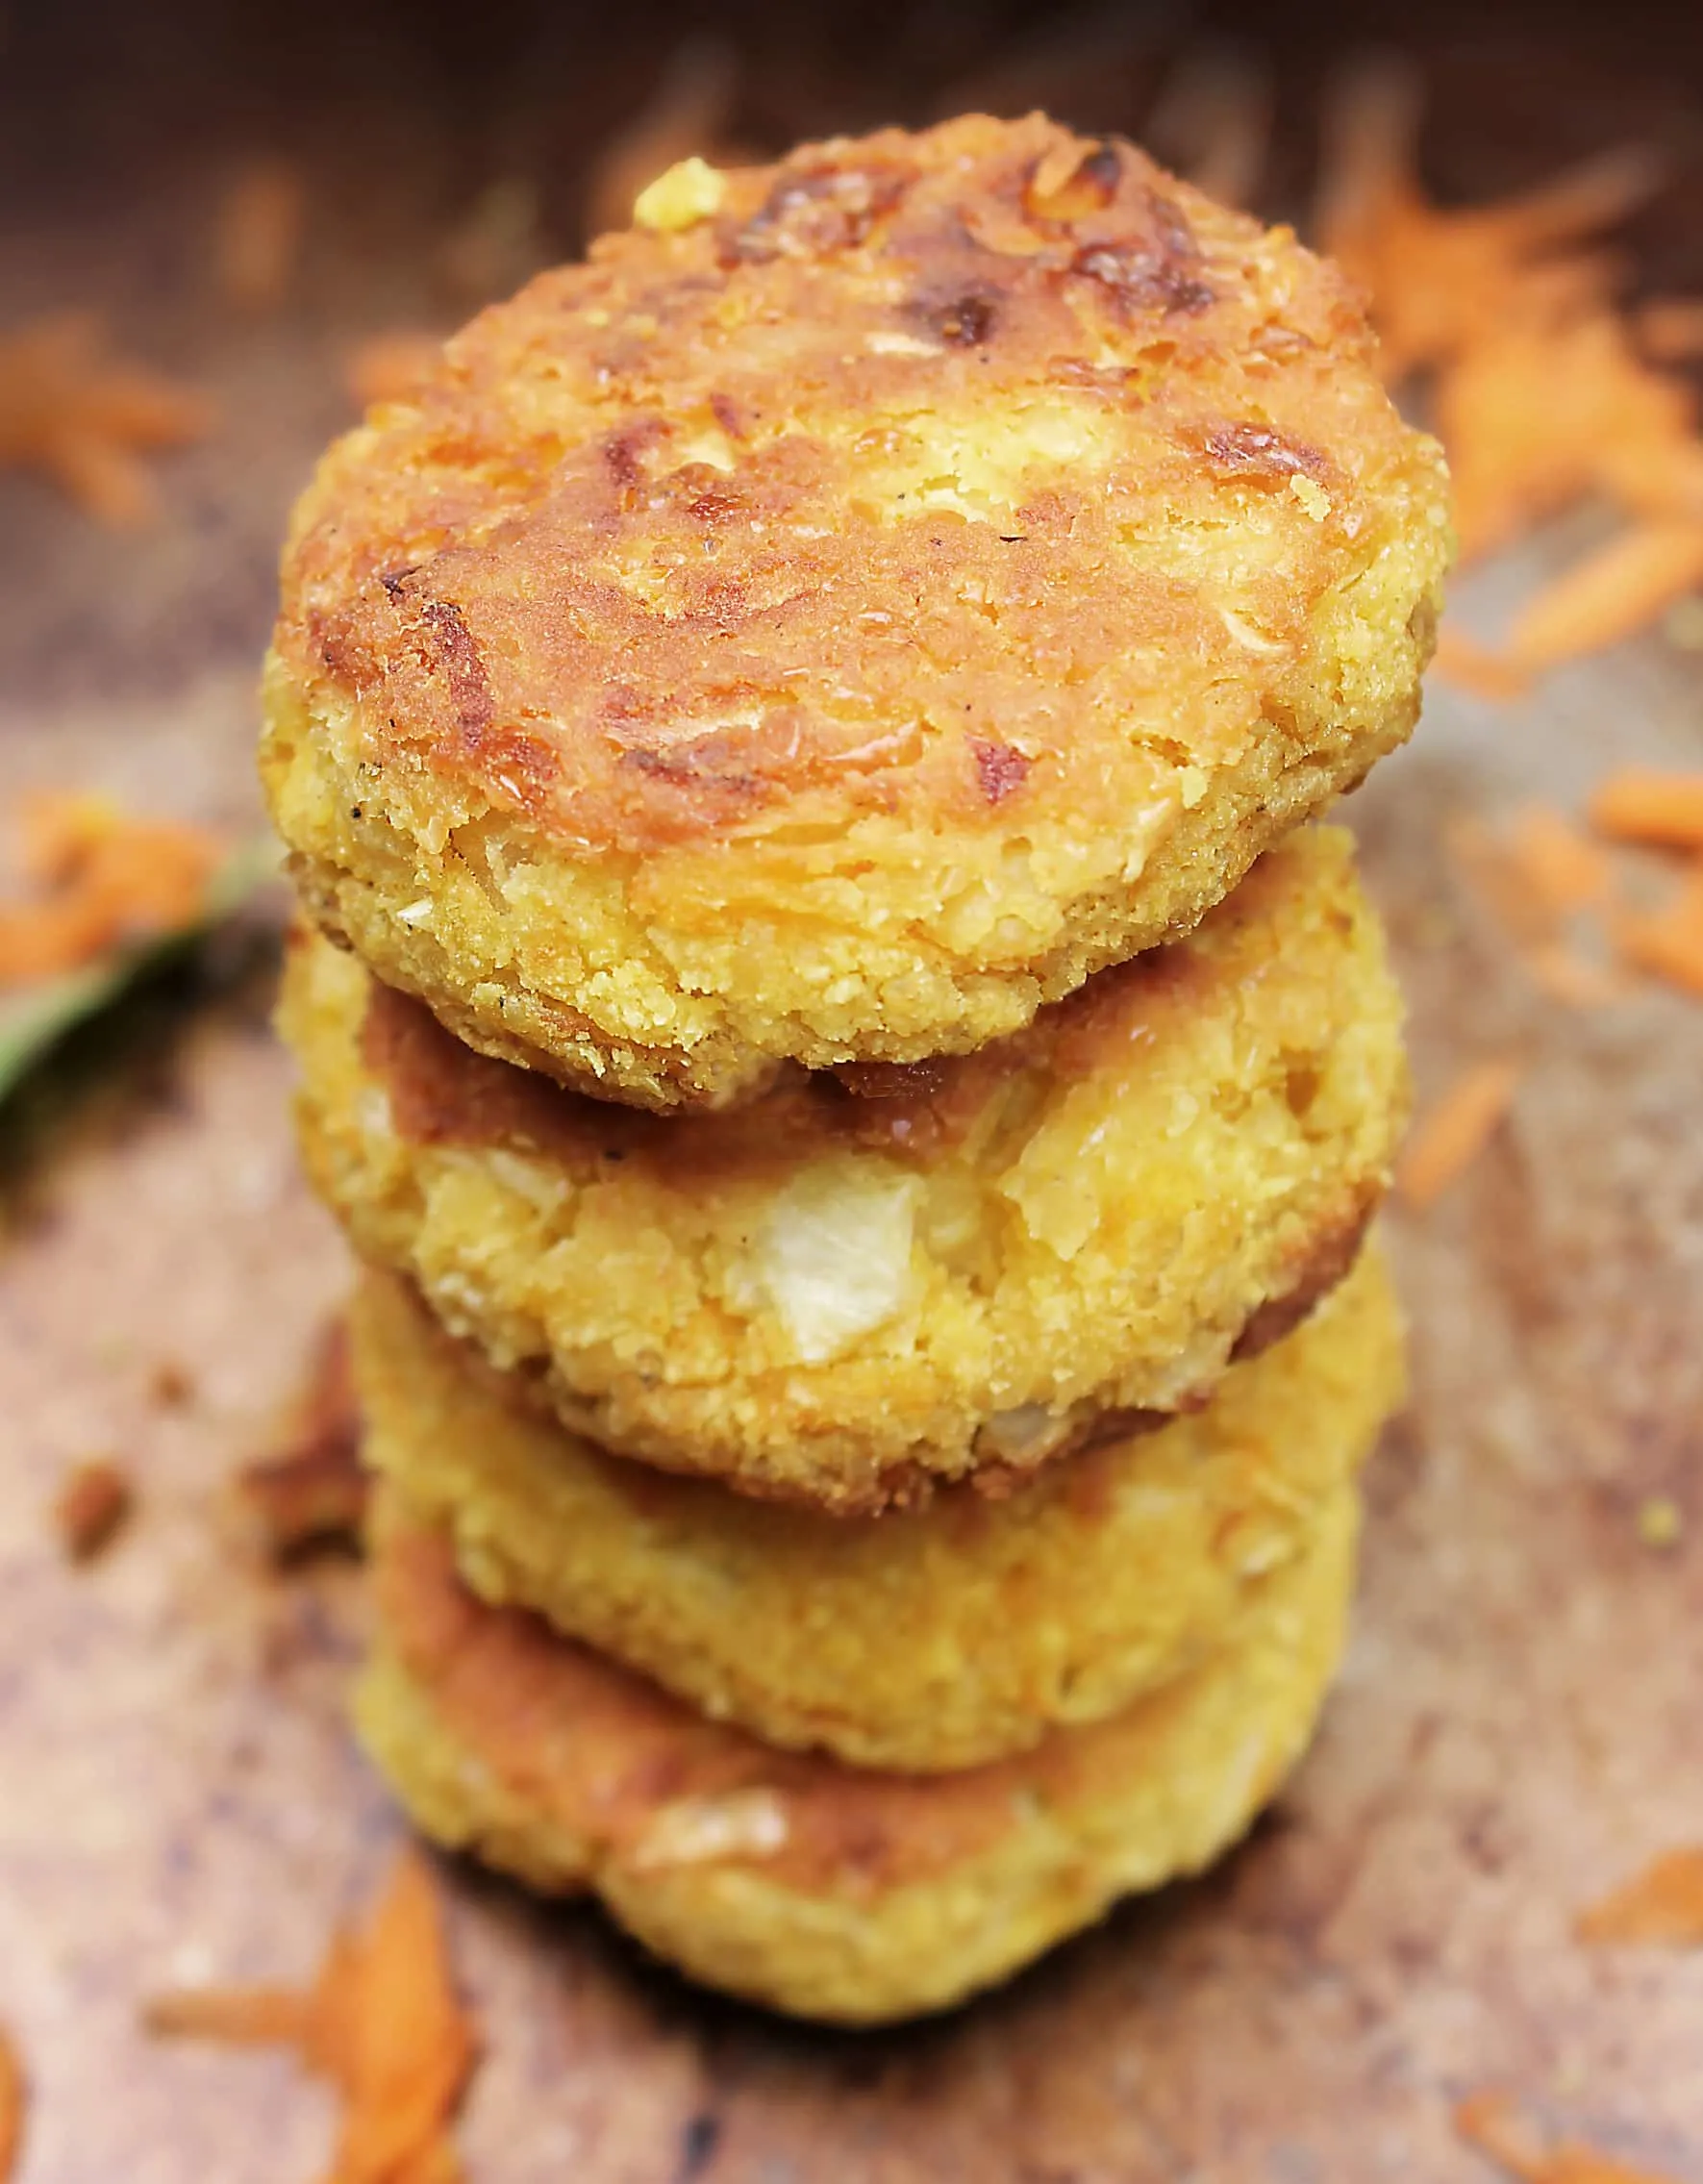 Stack of navy bean and carrot falafel